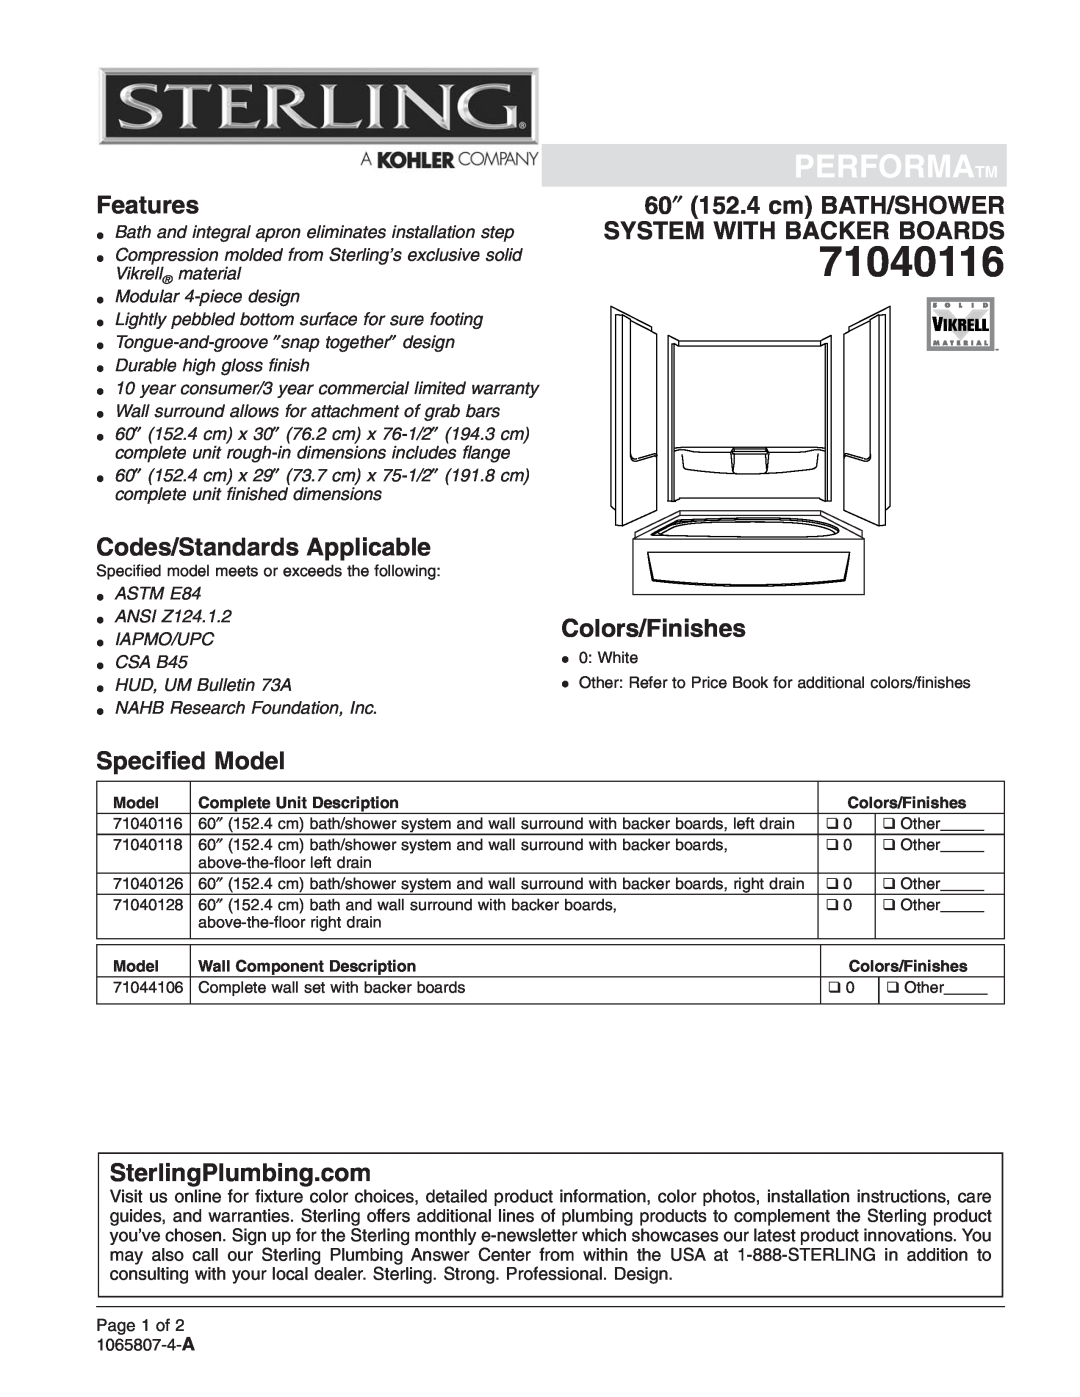 Sterling Plumbing 71040126 warranty Performatm, Features, 60″ 152.4 cm BATH/SHOWER, System With Backer Boards, 71040116 